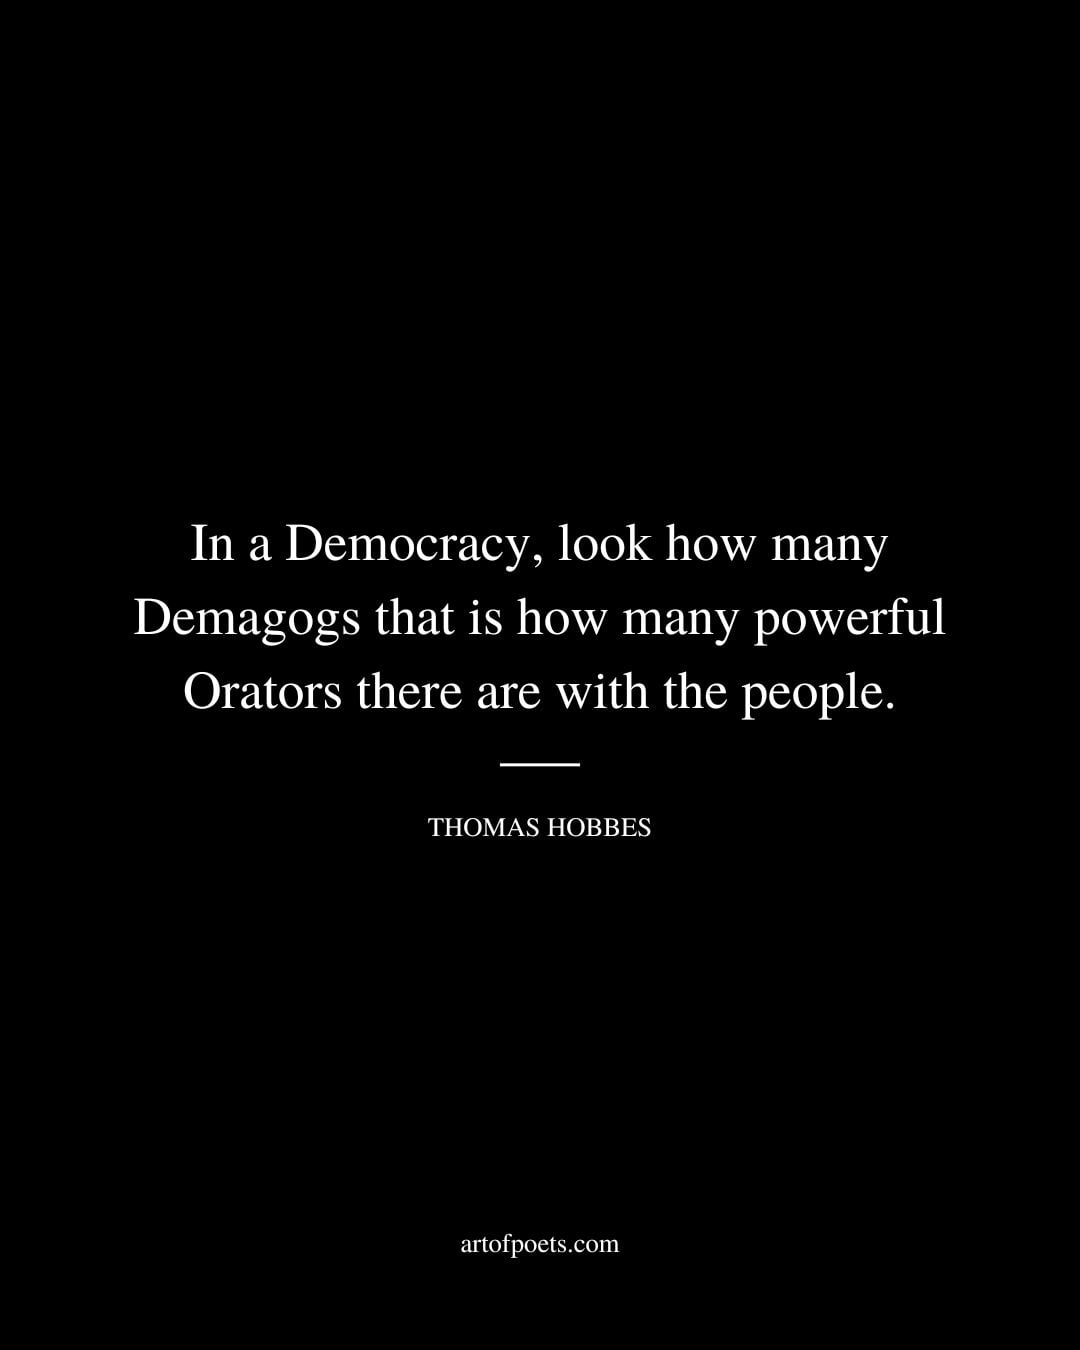 In a Democracy look how many Demagogs that is how many powerful Orators there are with the people